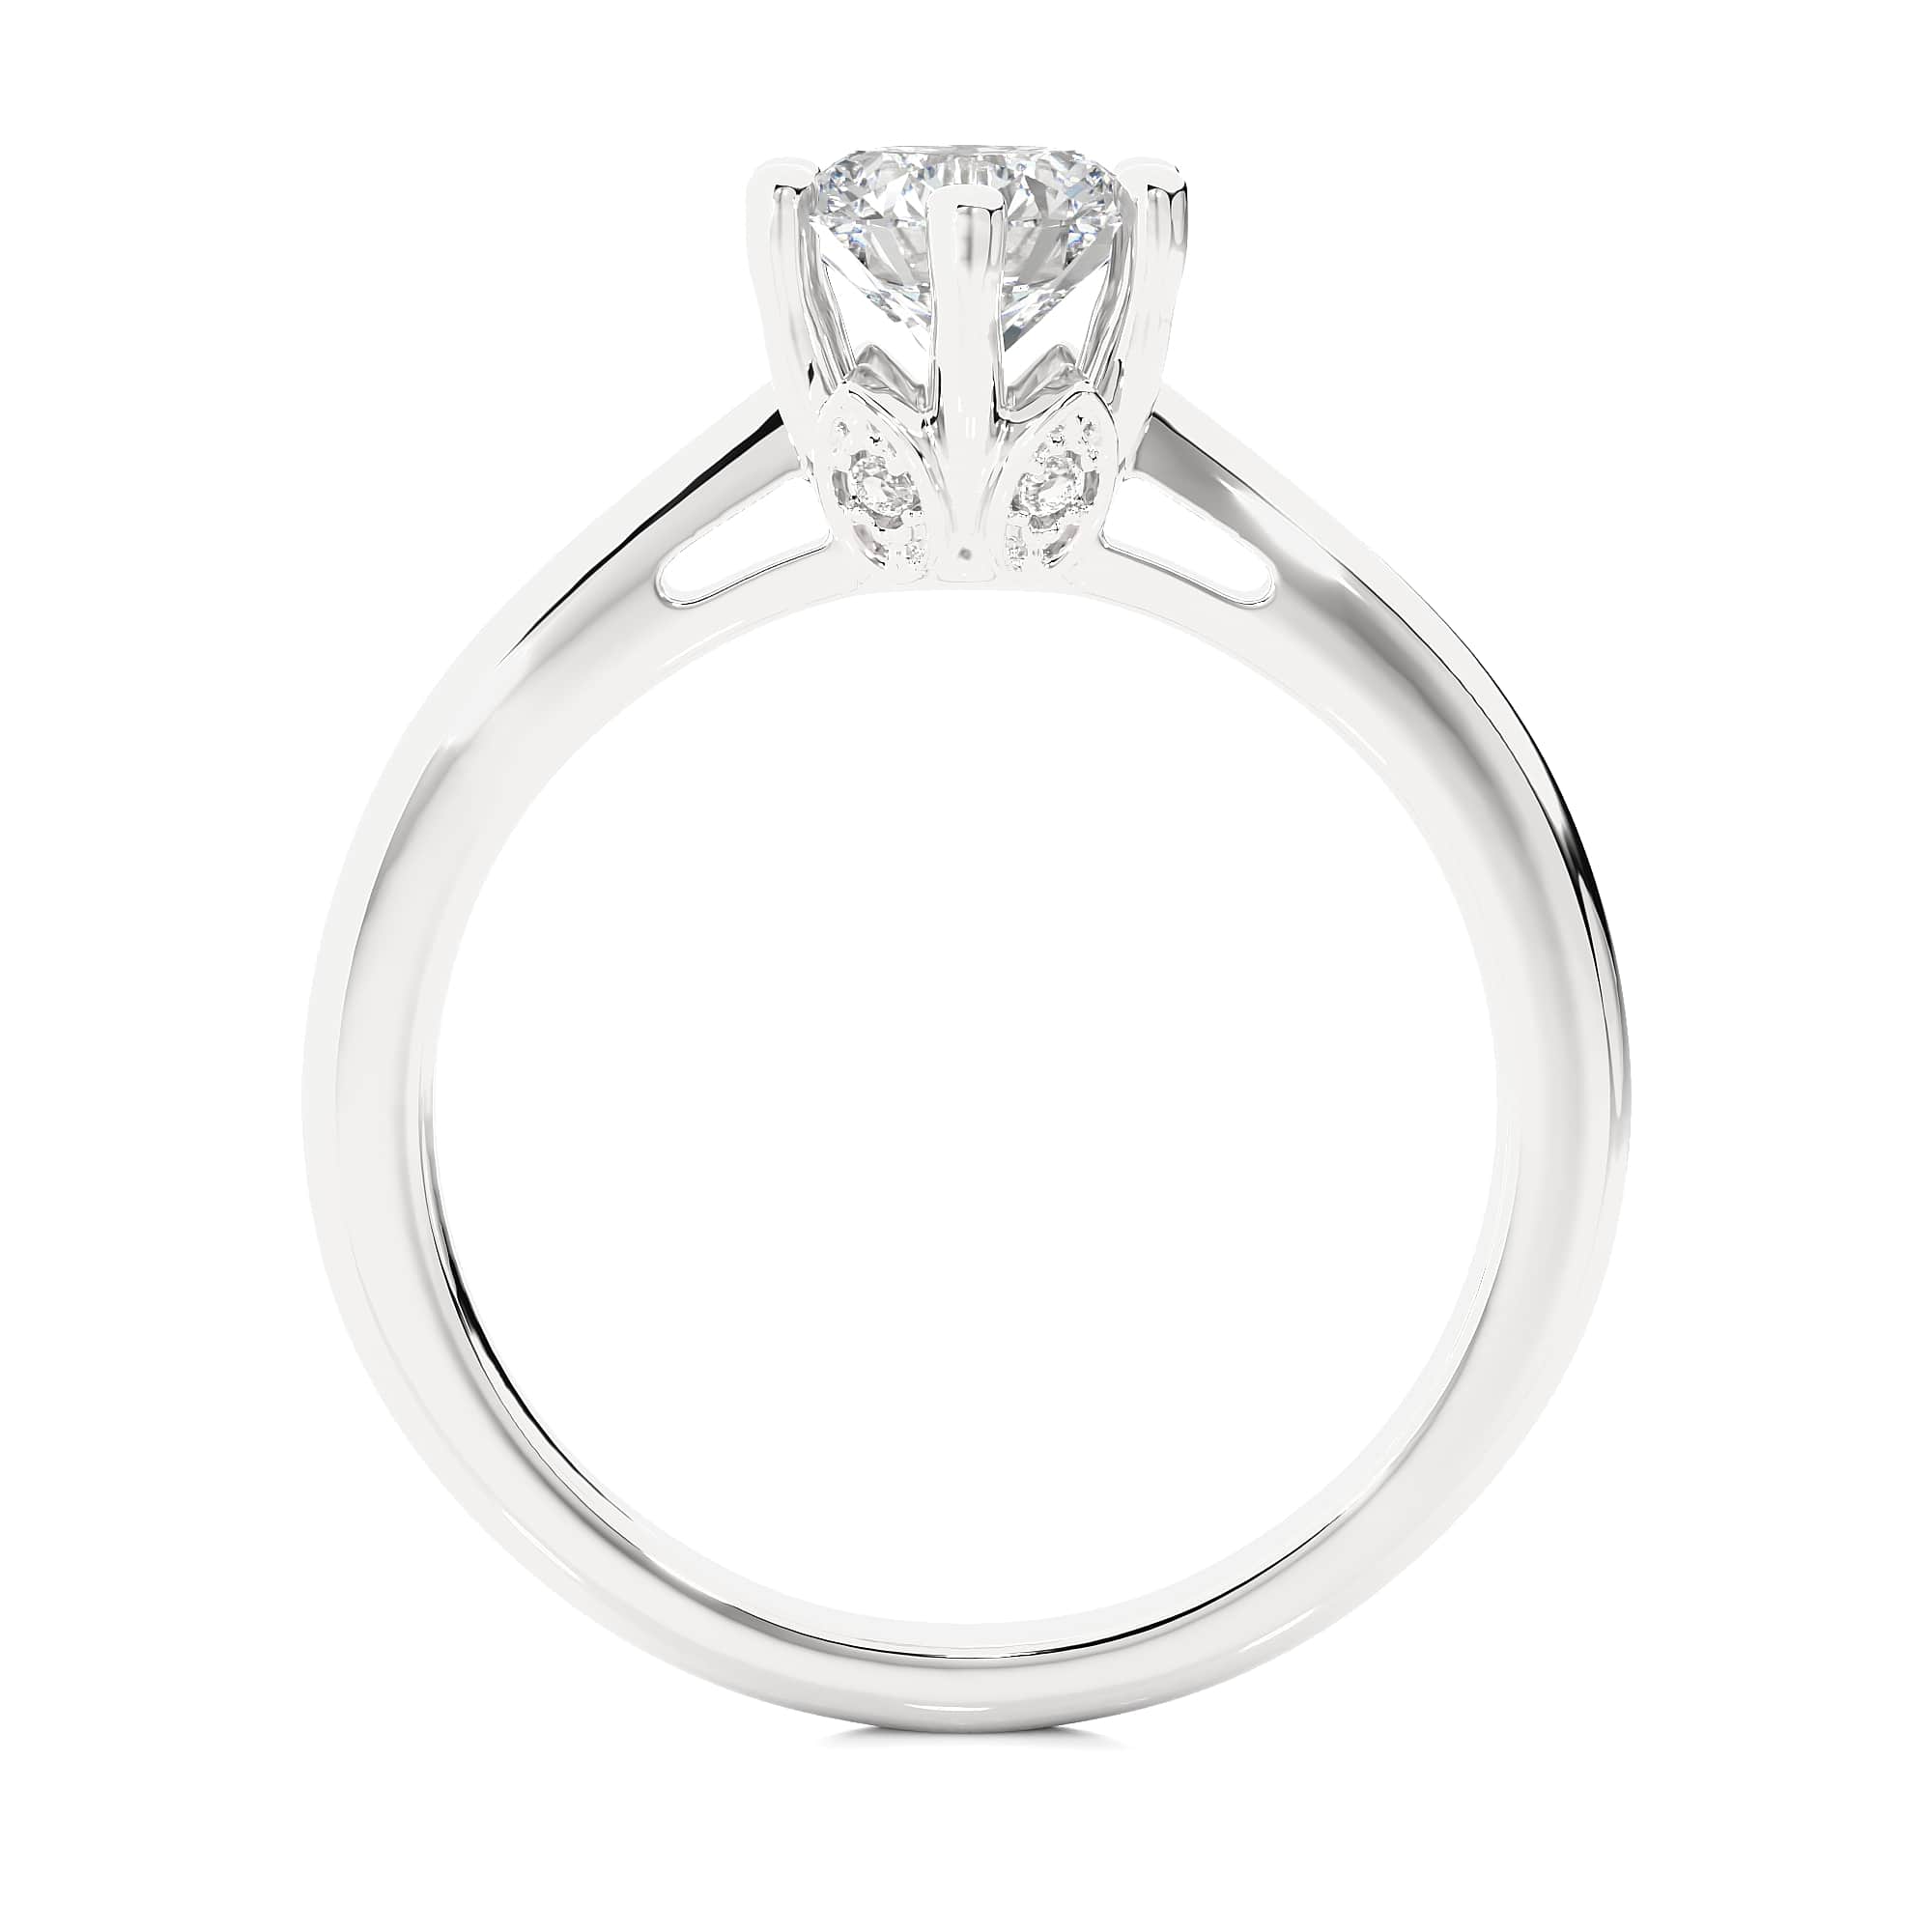 Solitaire Diamond Ring in White Gold